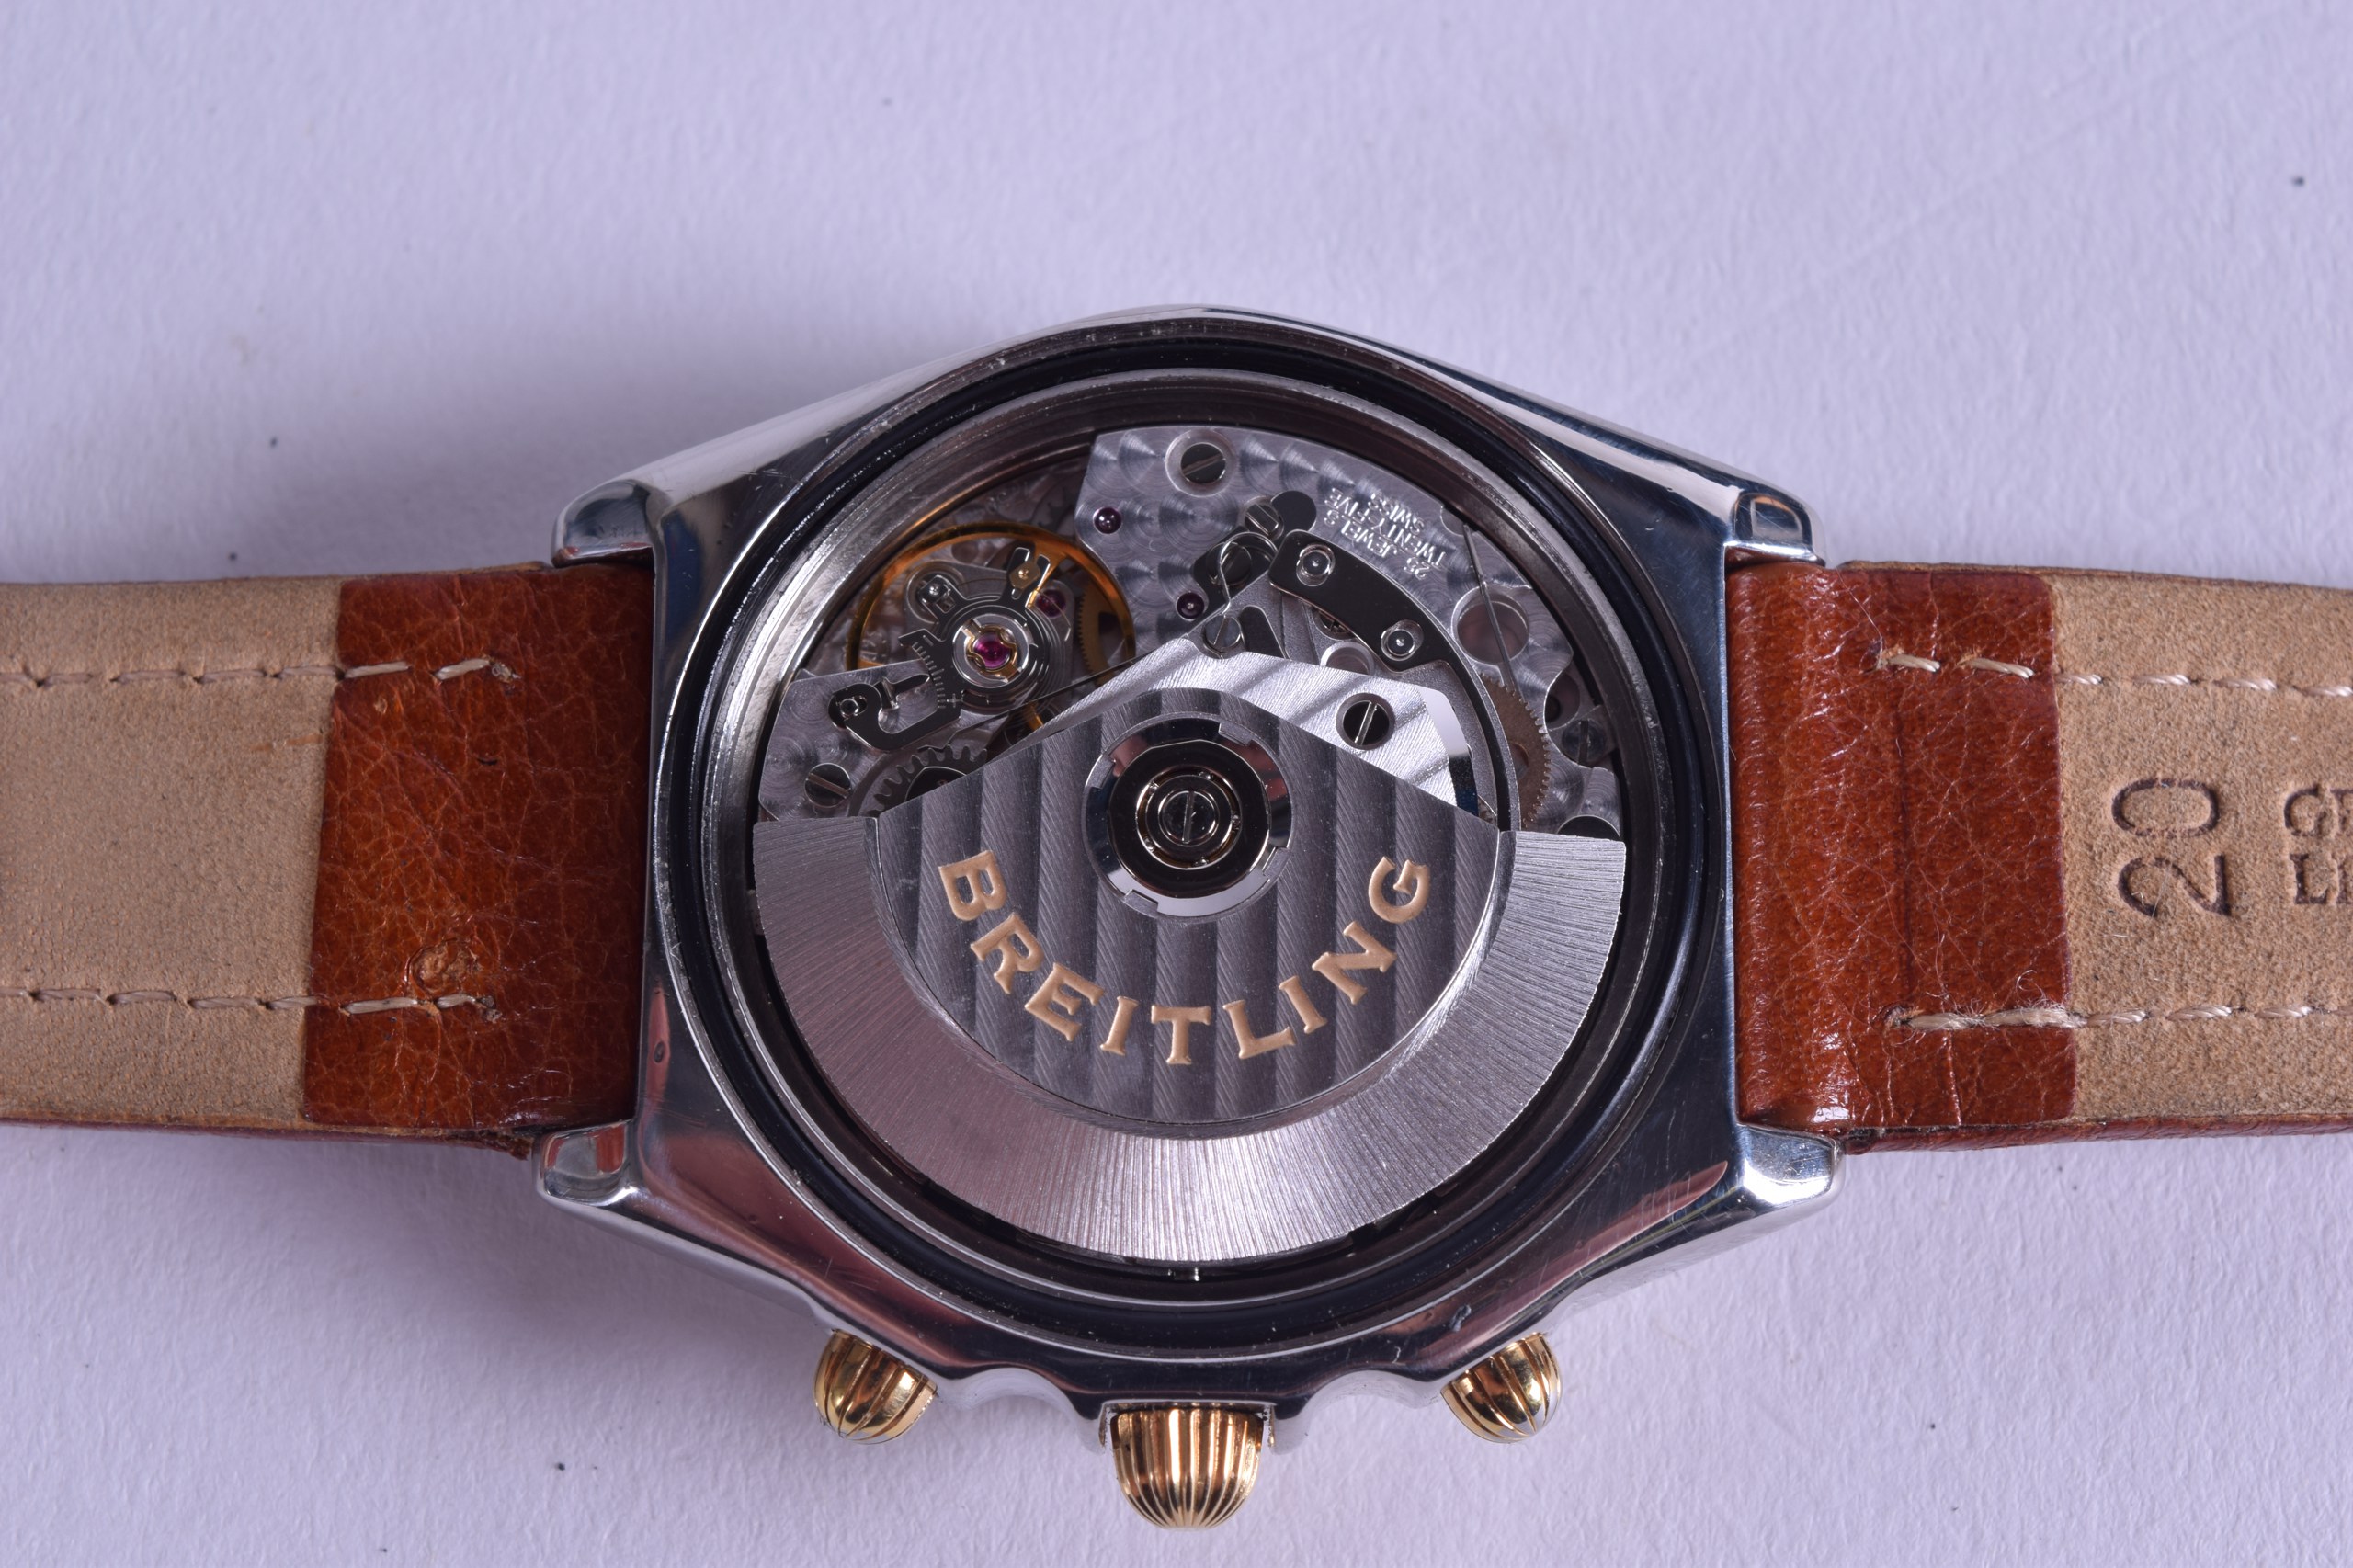 A GENTLEMANS BOXED BREITLING CHRONOGRAPH WRISTWATCH. 3.5 cm wide. - Image 4 of 5